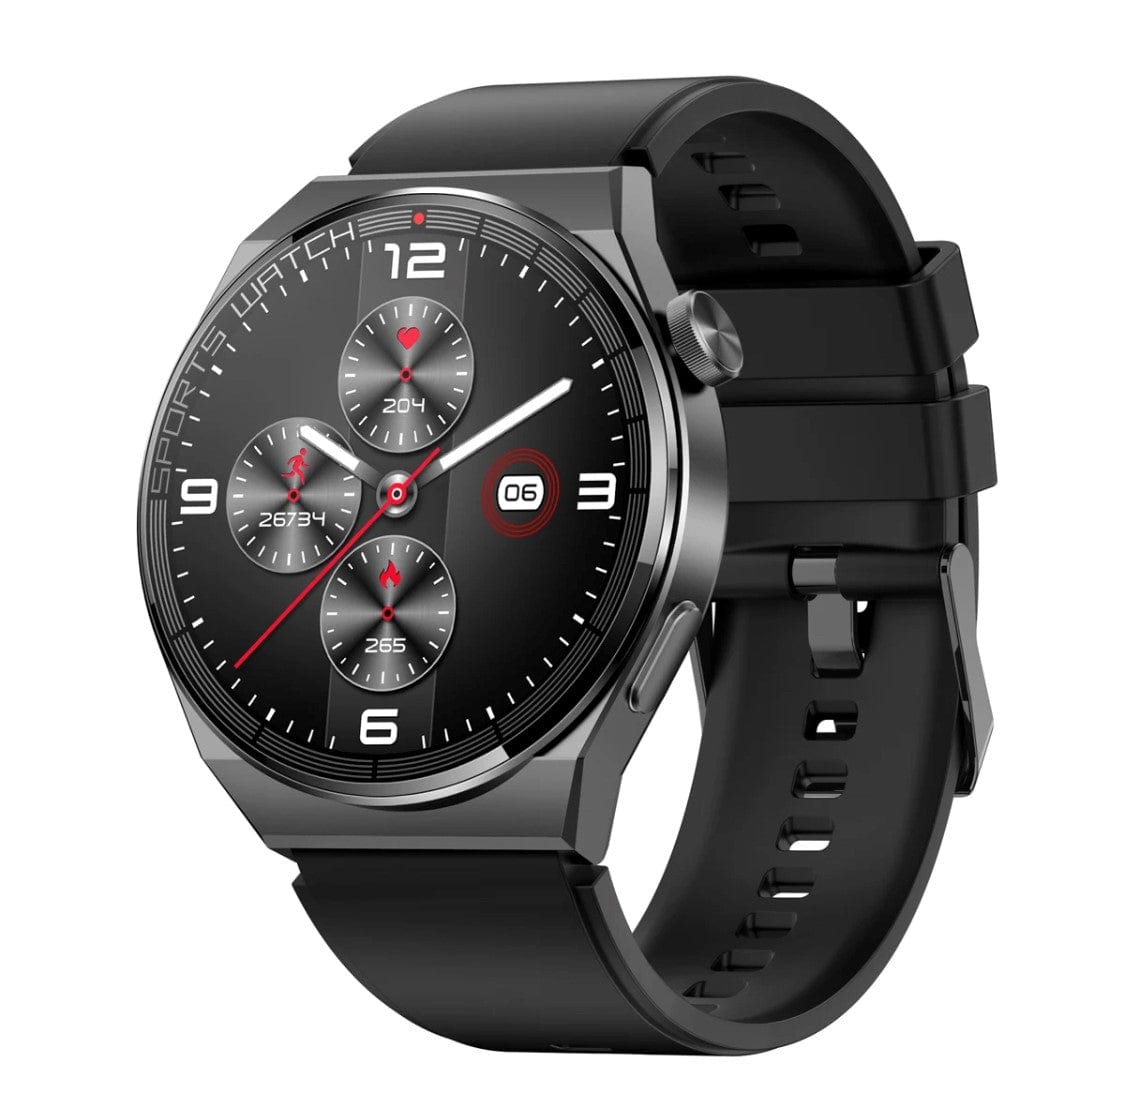 Smartoby Waterproof Smart Watch with extra leather straps - Smart Watch SA